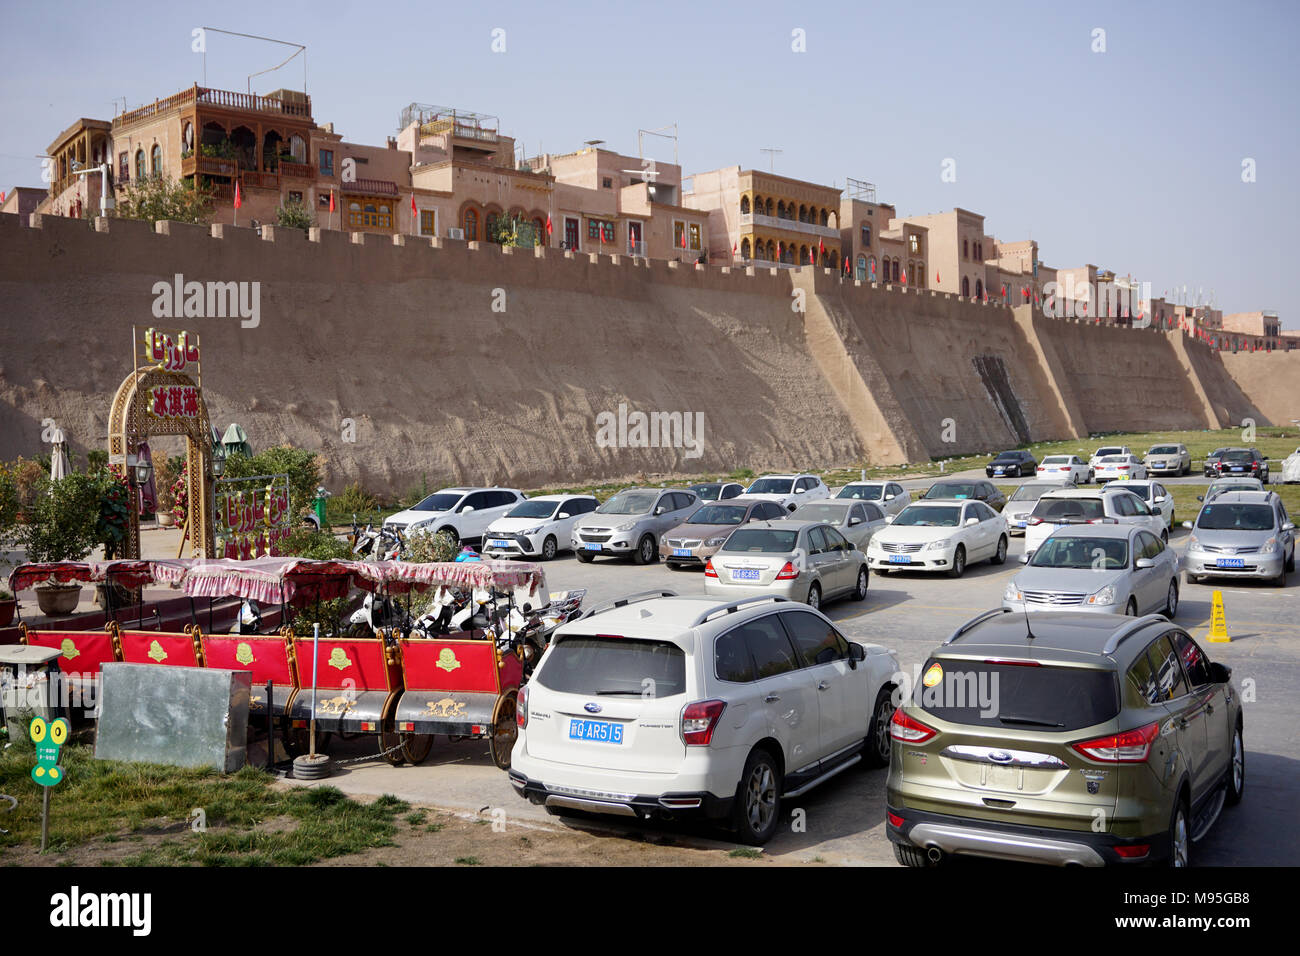 The rebuilt city wall in the old town of Kashgar in Xinjiang, China Stock Photo